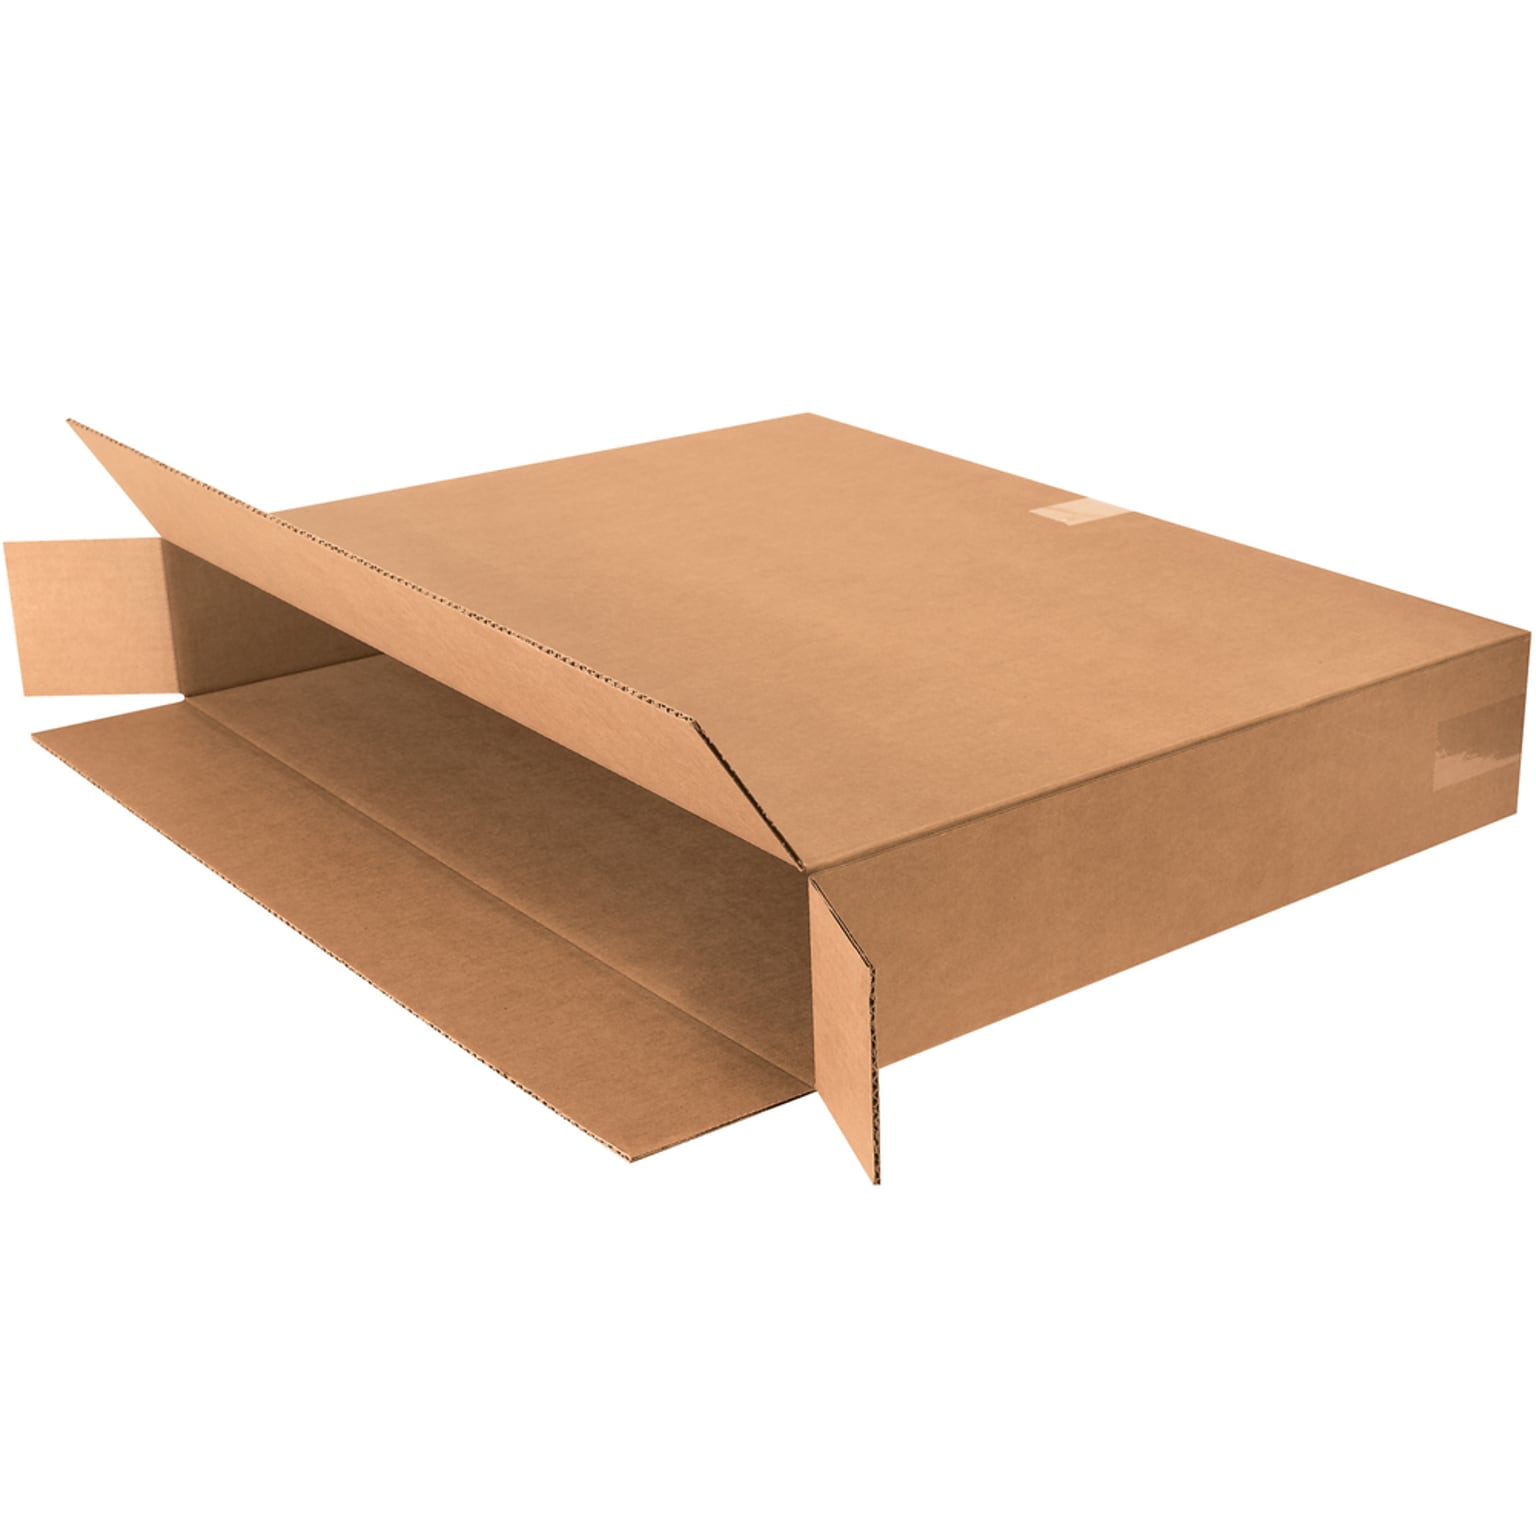 SI Products 30 x 5 x 24 Side Shipping Boxes, 200#/ECT-32 Mullen Rated Corrugated, Pack of 10, (30524FOL)